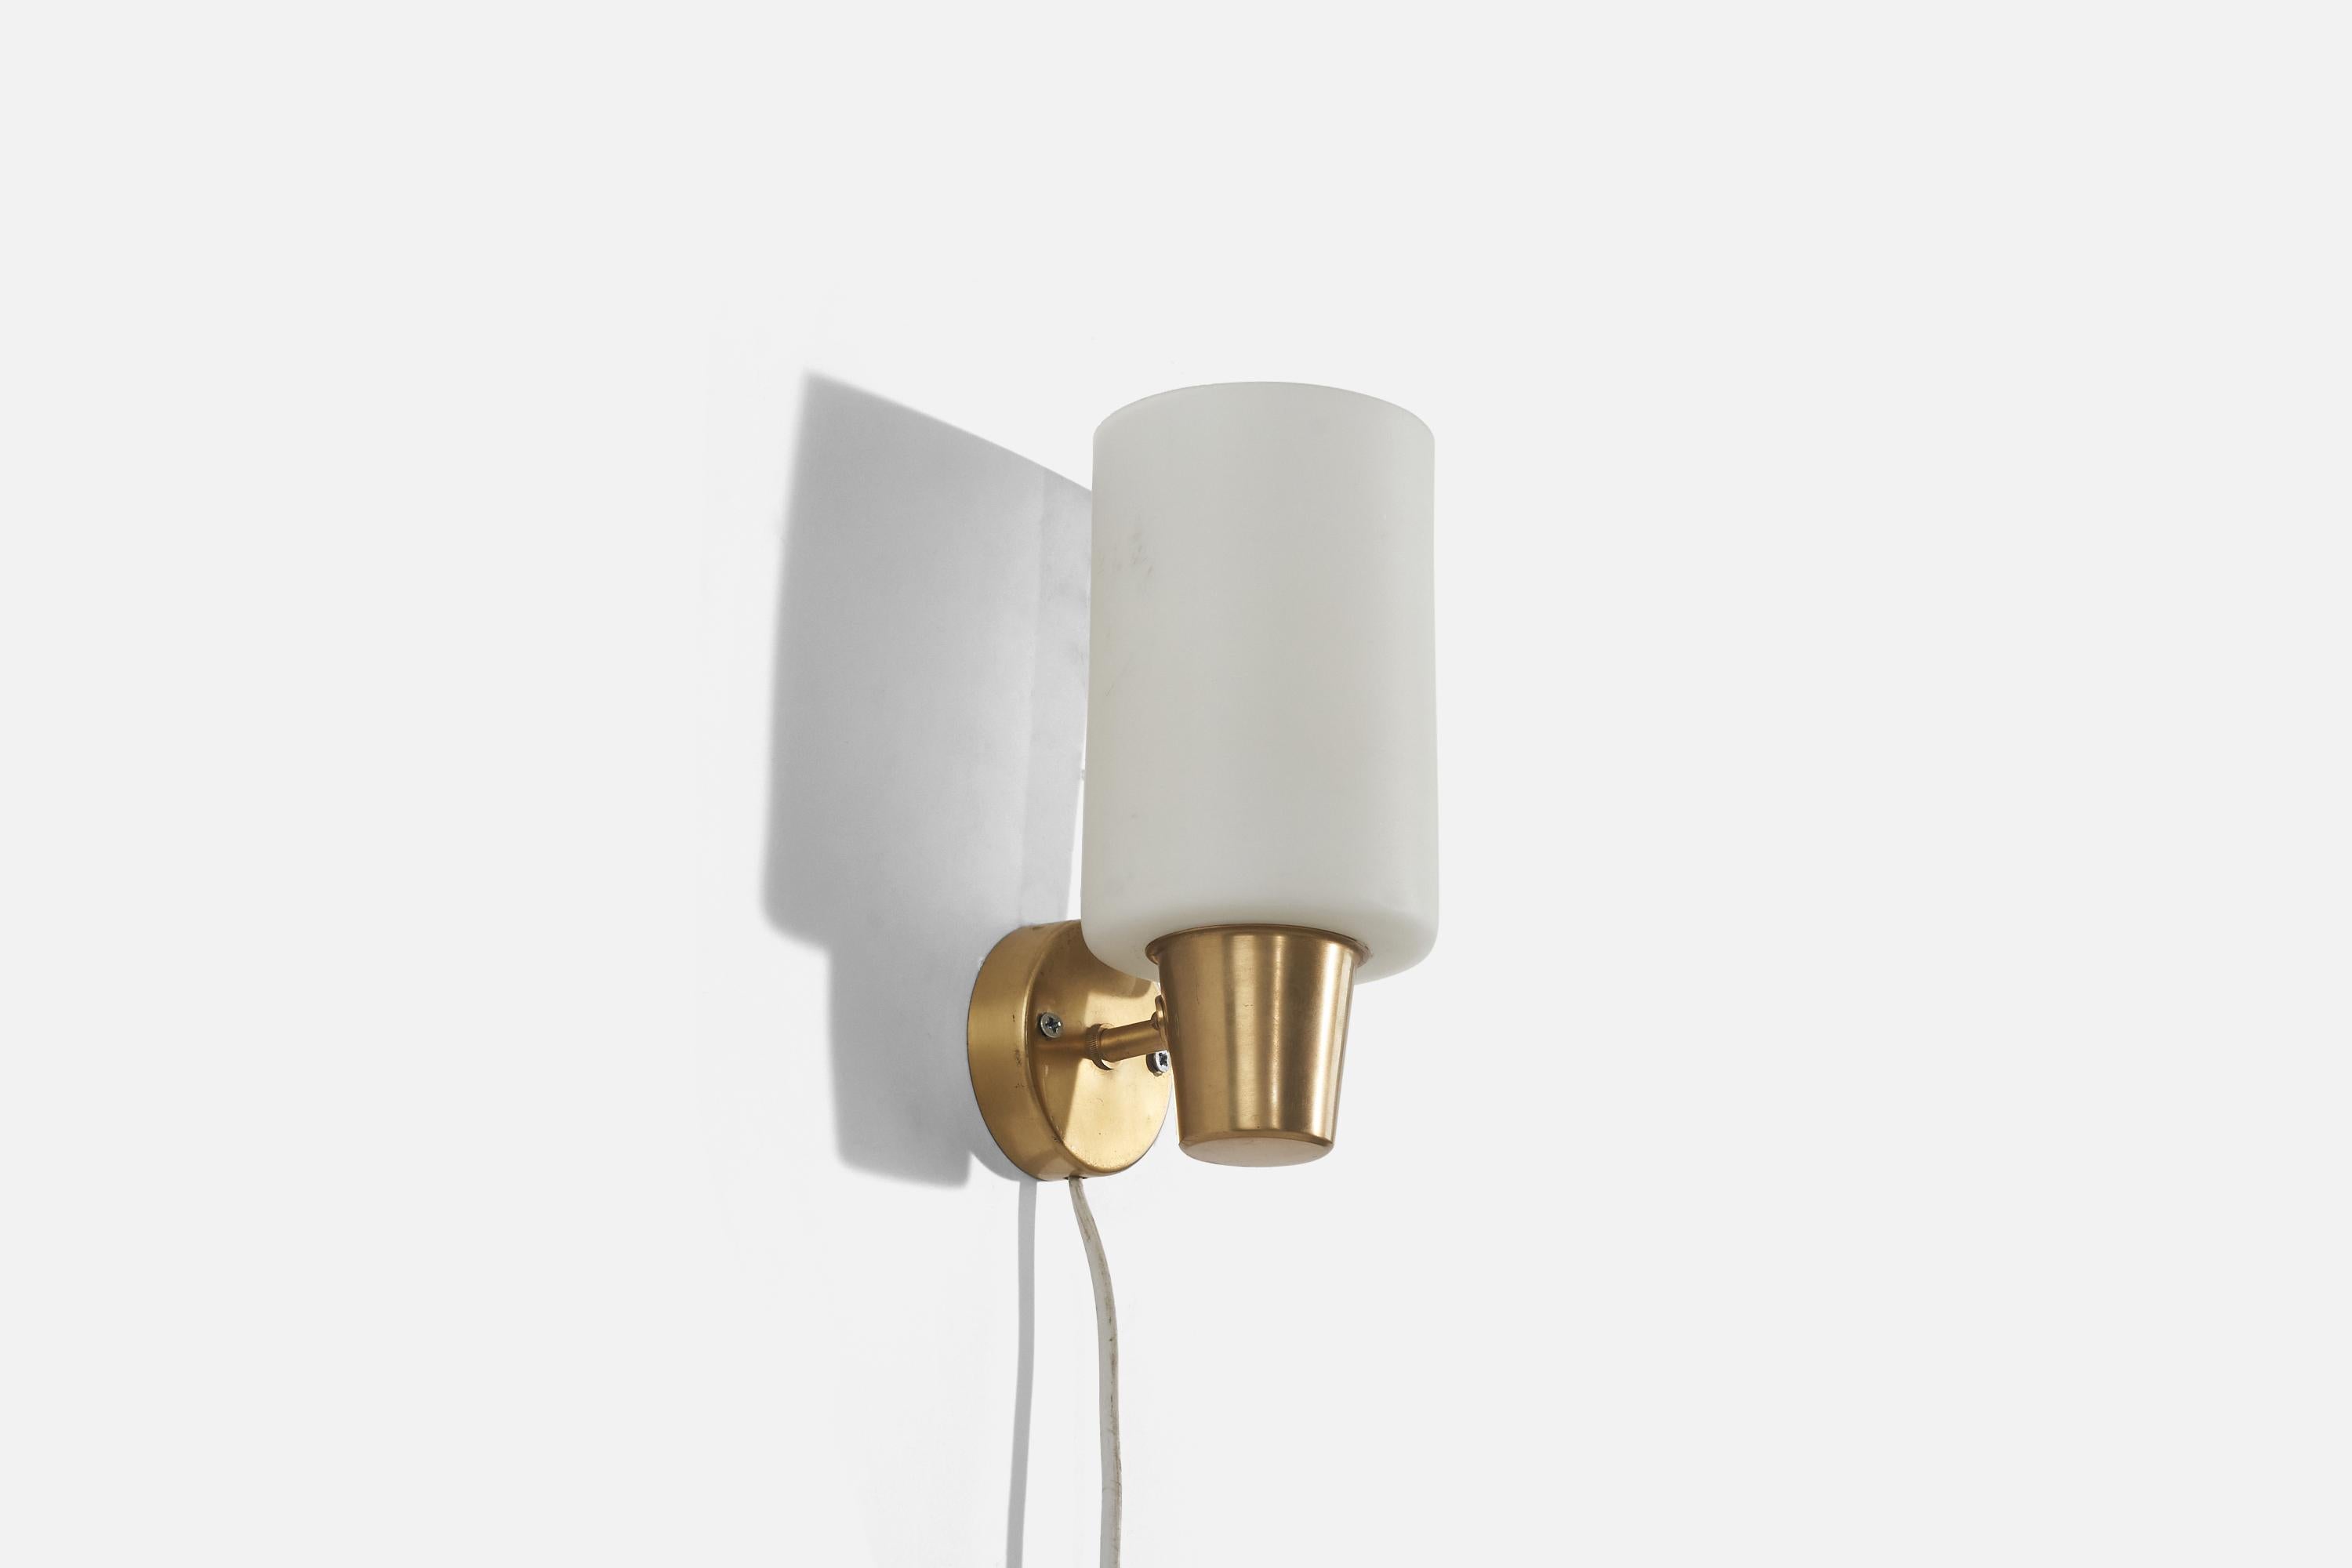 A pair of brass and glass wall lights designed by Hans Bergström and produced by Atelje Lyktan, Sweden, c. 1950s.

Dimensions of back plate (inches) : 2.81 x 2.81 x 0.75 (H x W x D).